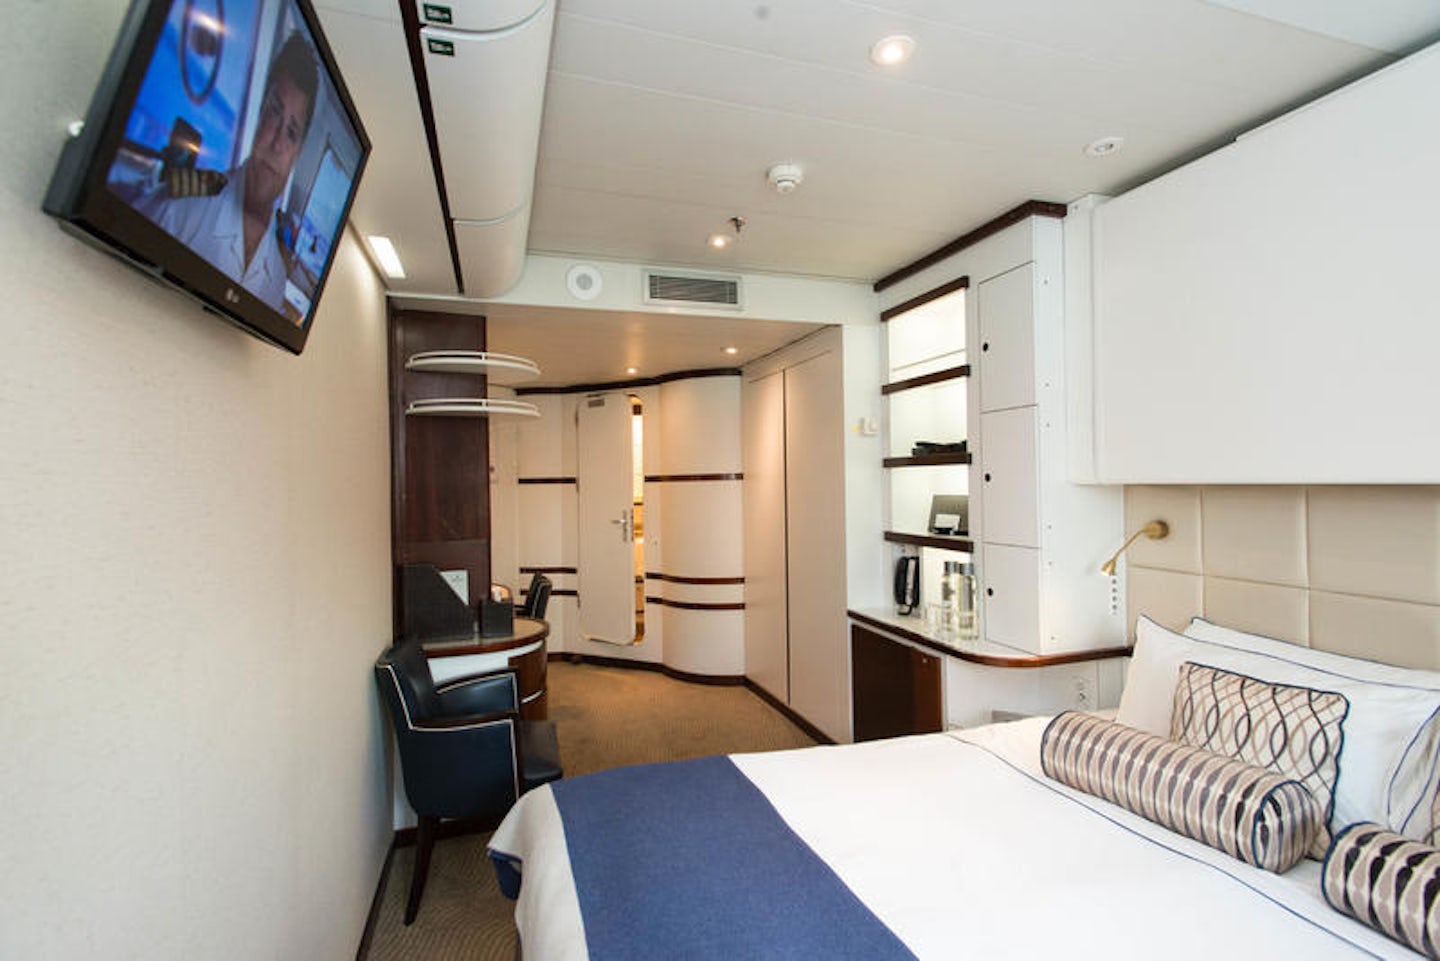 The Ocean-View Cabin (Category B) on Wind Surf